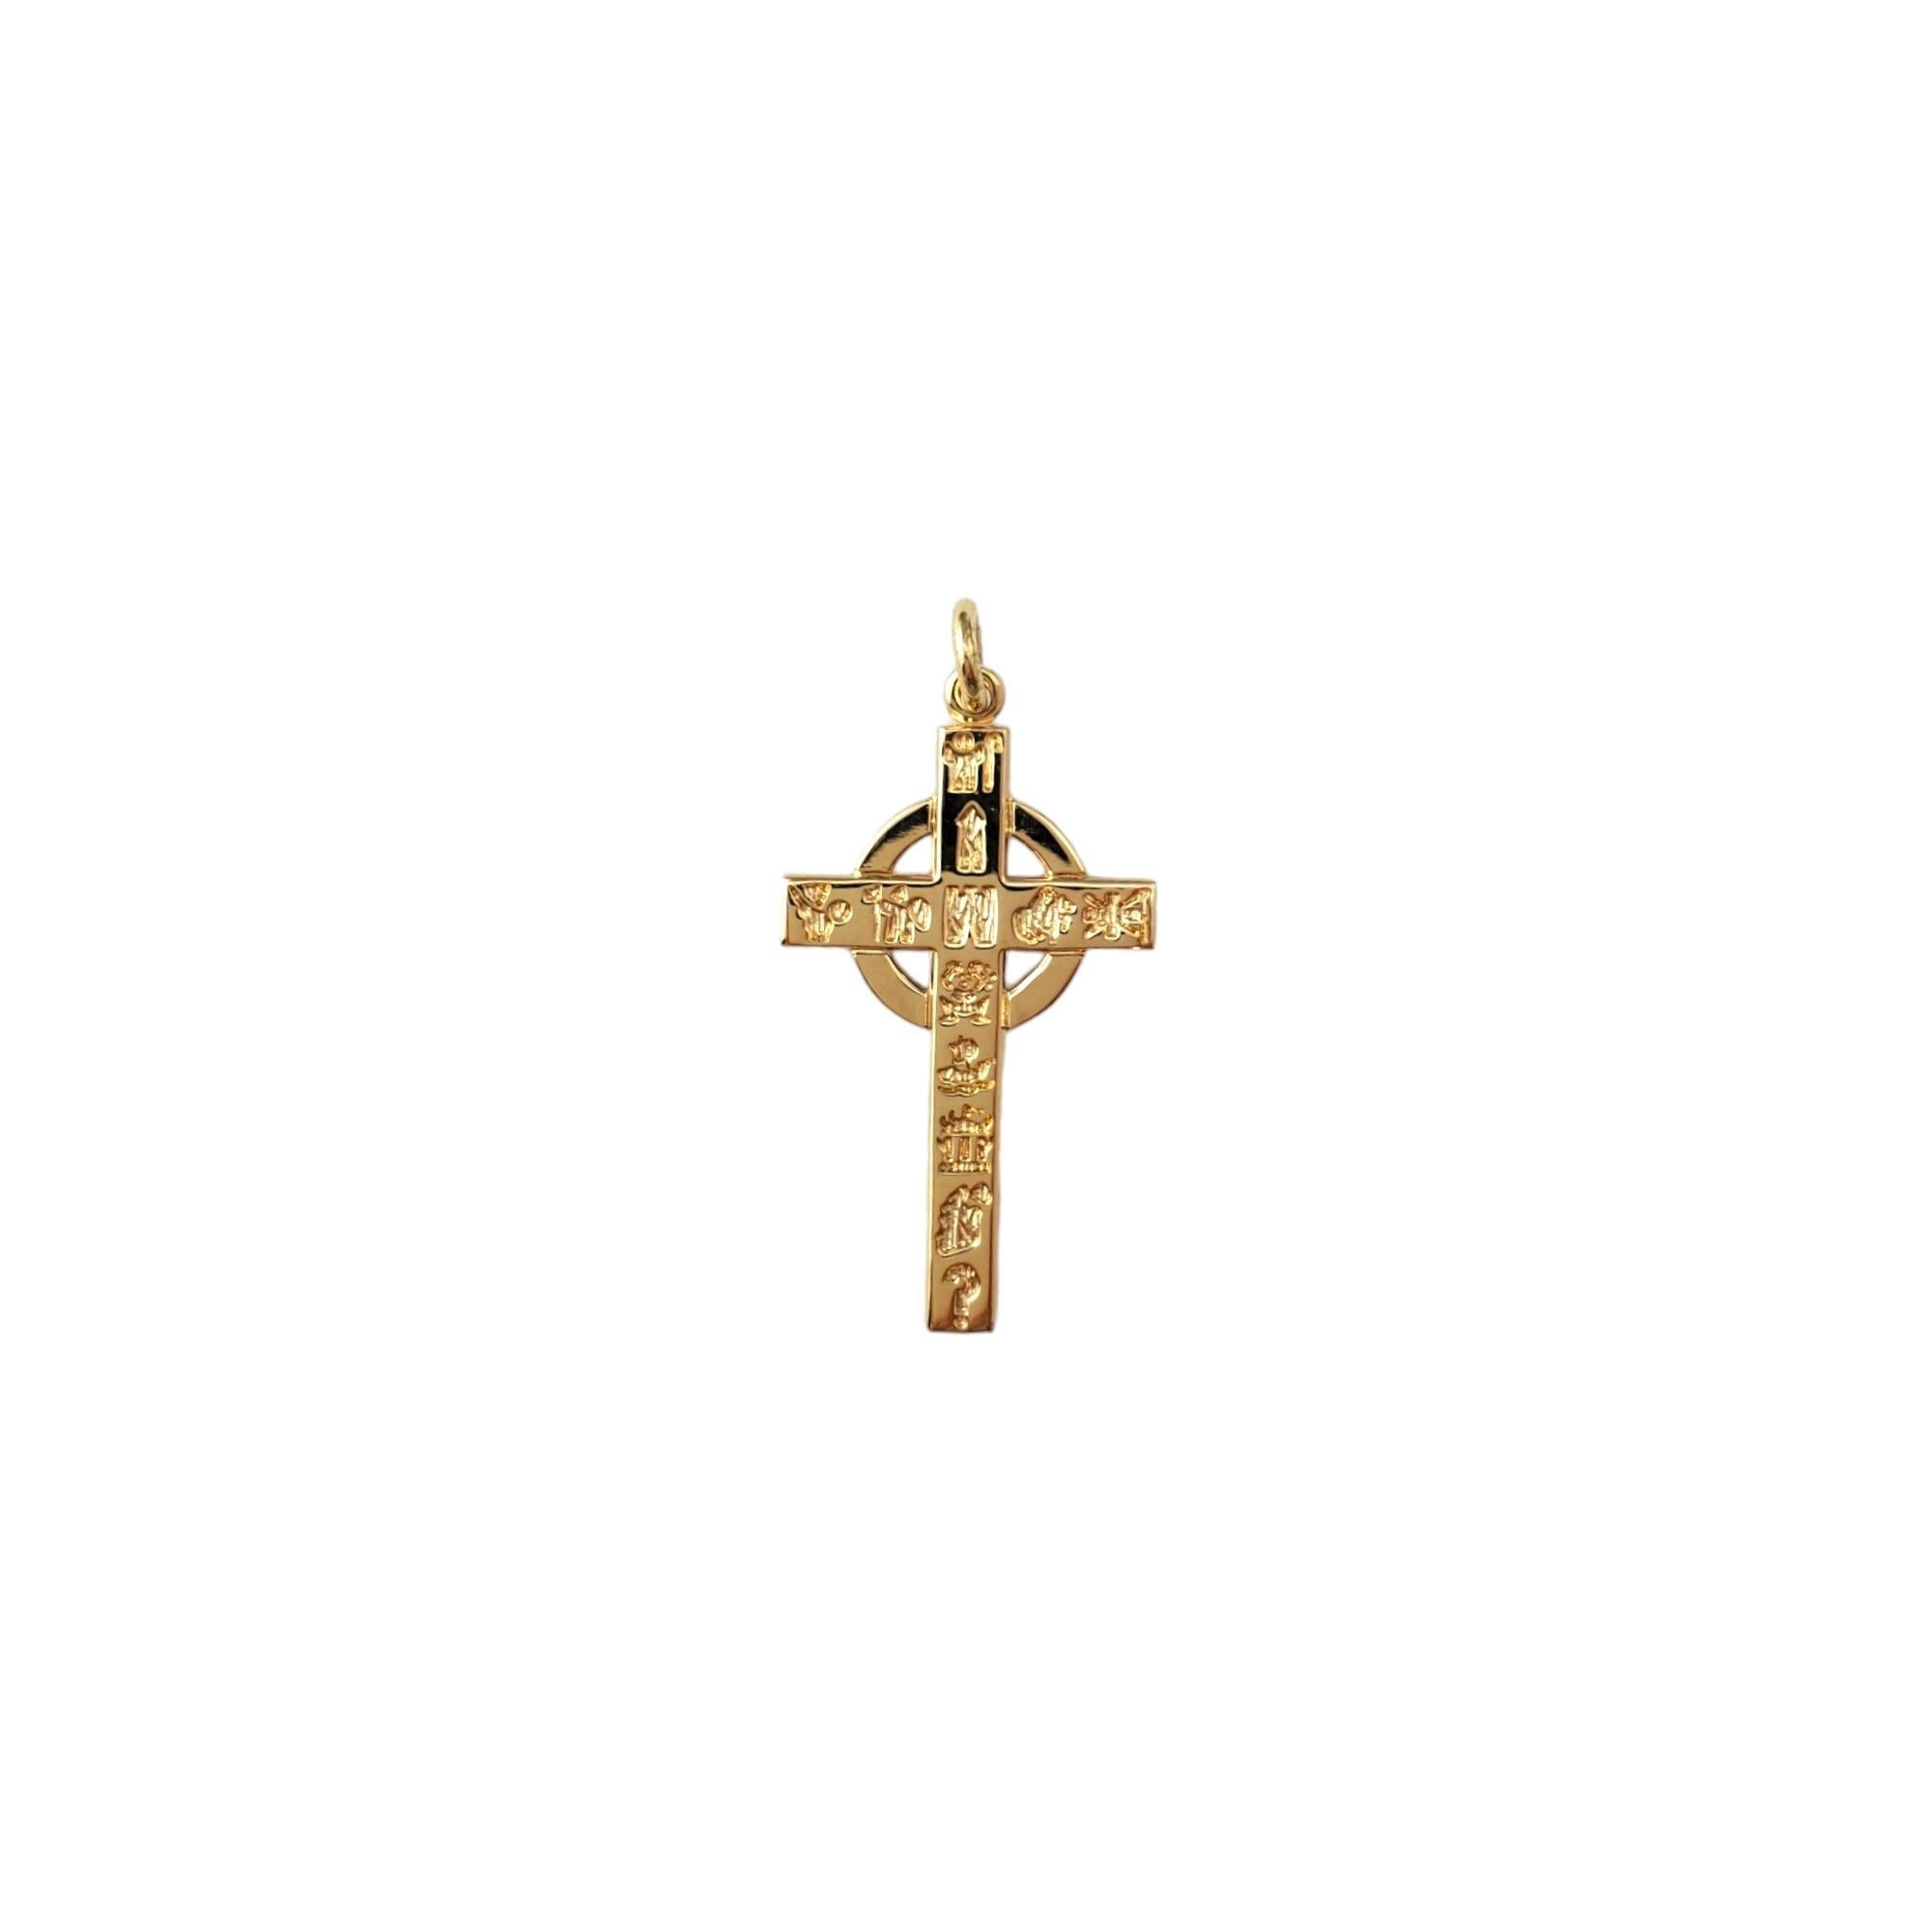 14K Yellow Gold Celtic Cross Pendant -

This intricate cross pendant serves as a meaningful accessory. 

Size: 33.2mm X 18.8mm X 1.5mm

Weight: 2.2dwt. / 3.4 gr.

Marked: 585

Very good condition, professionally polished.
Will come packaged in a